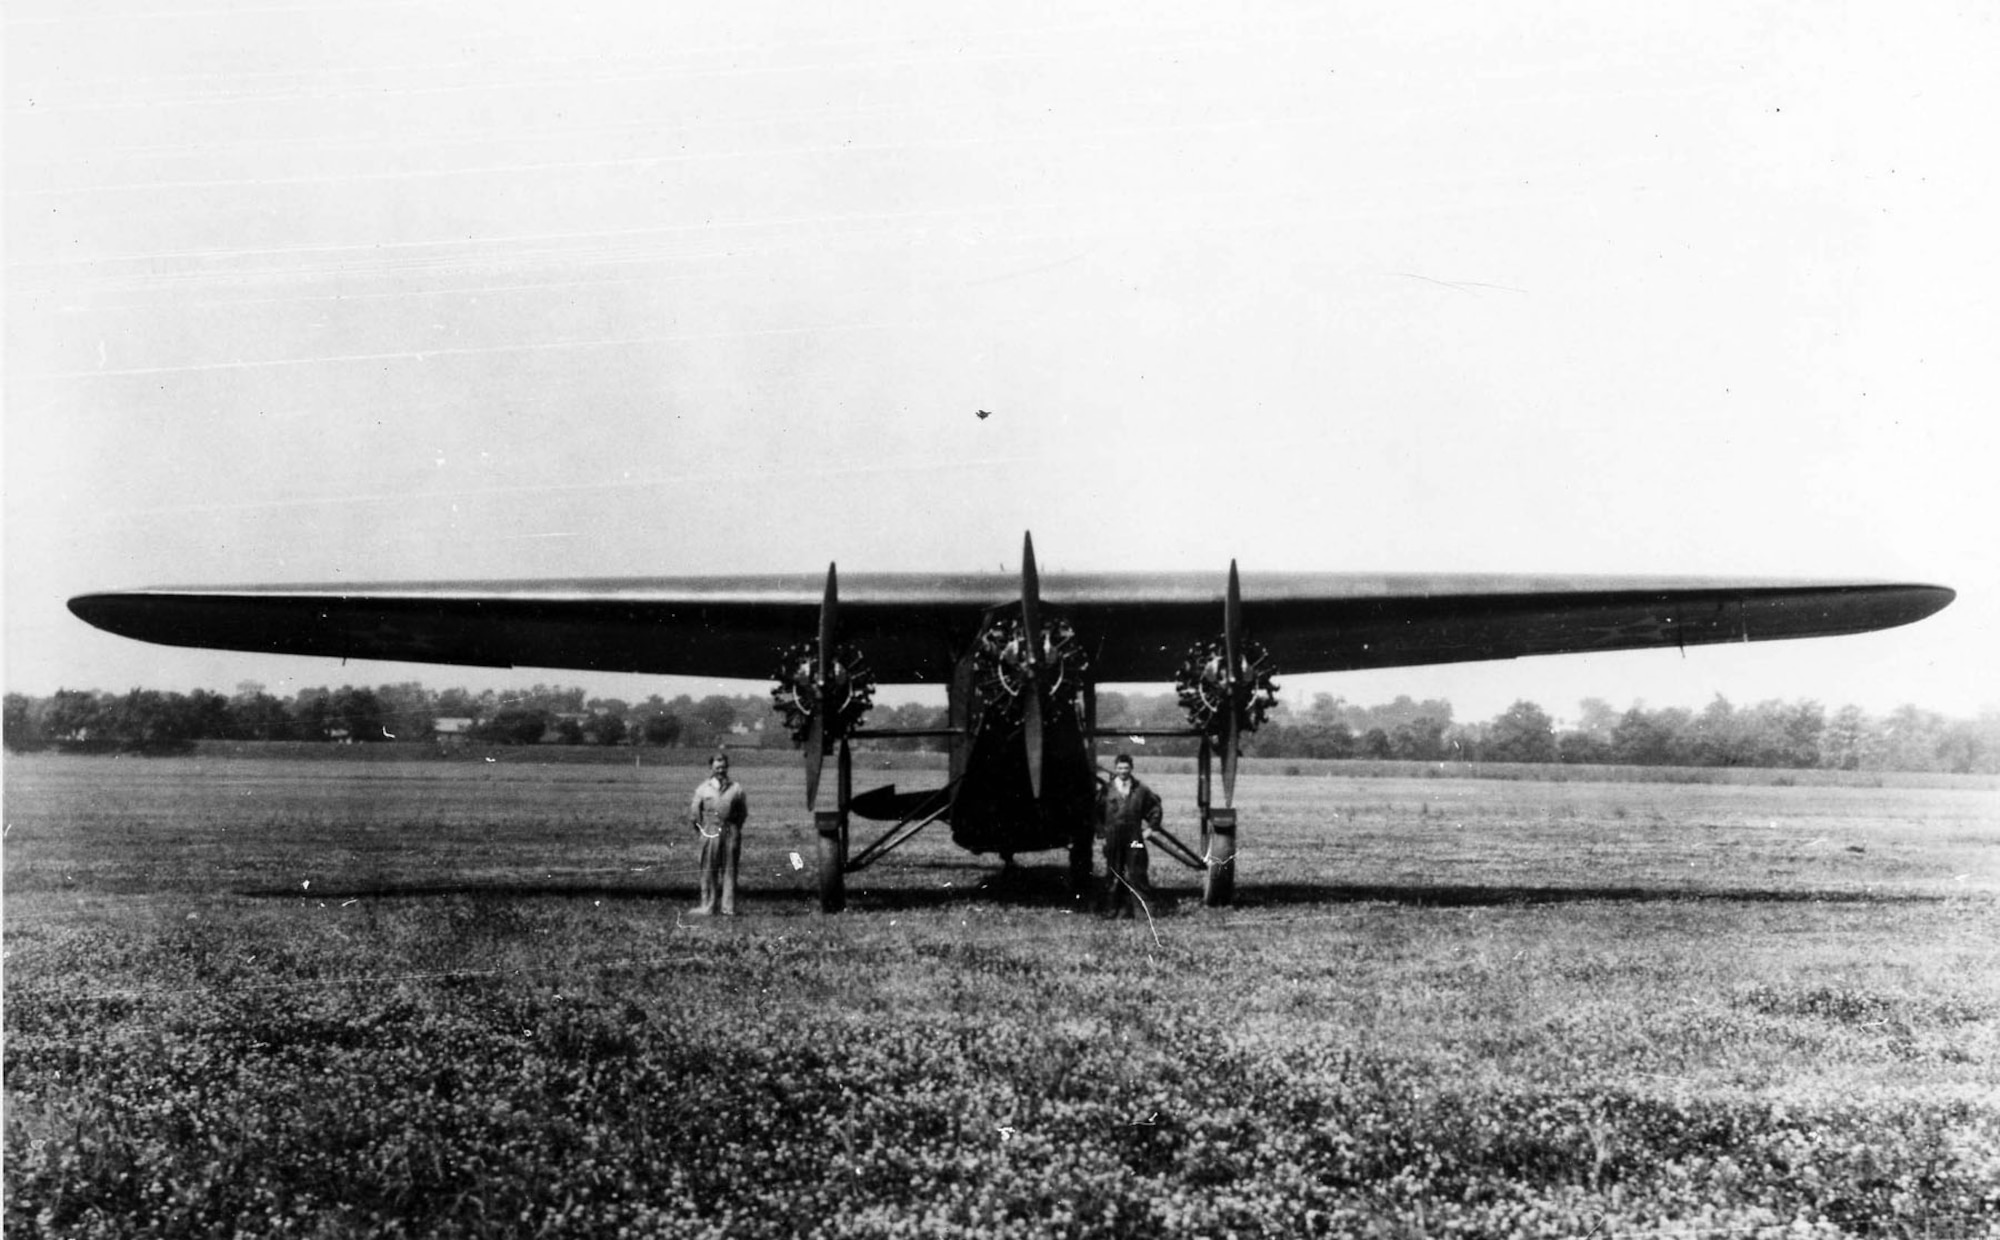 Atlantic-Fokker C-2 "Bird of Paradise" front view. (U.S. Air Force photo)